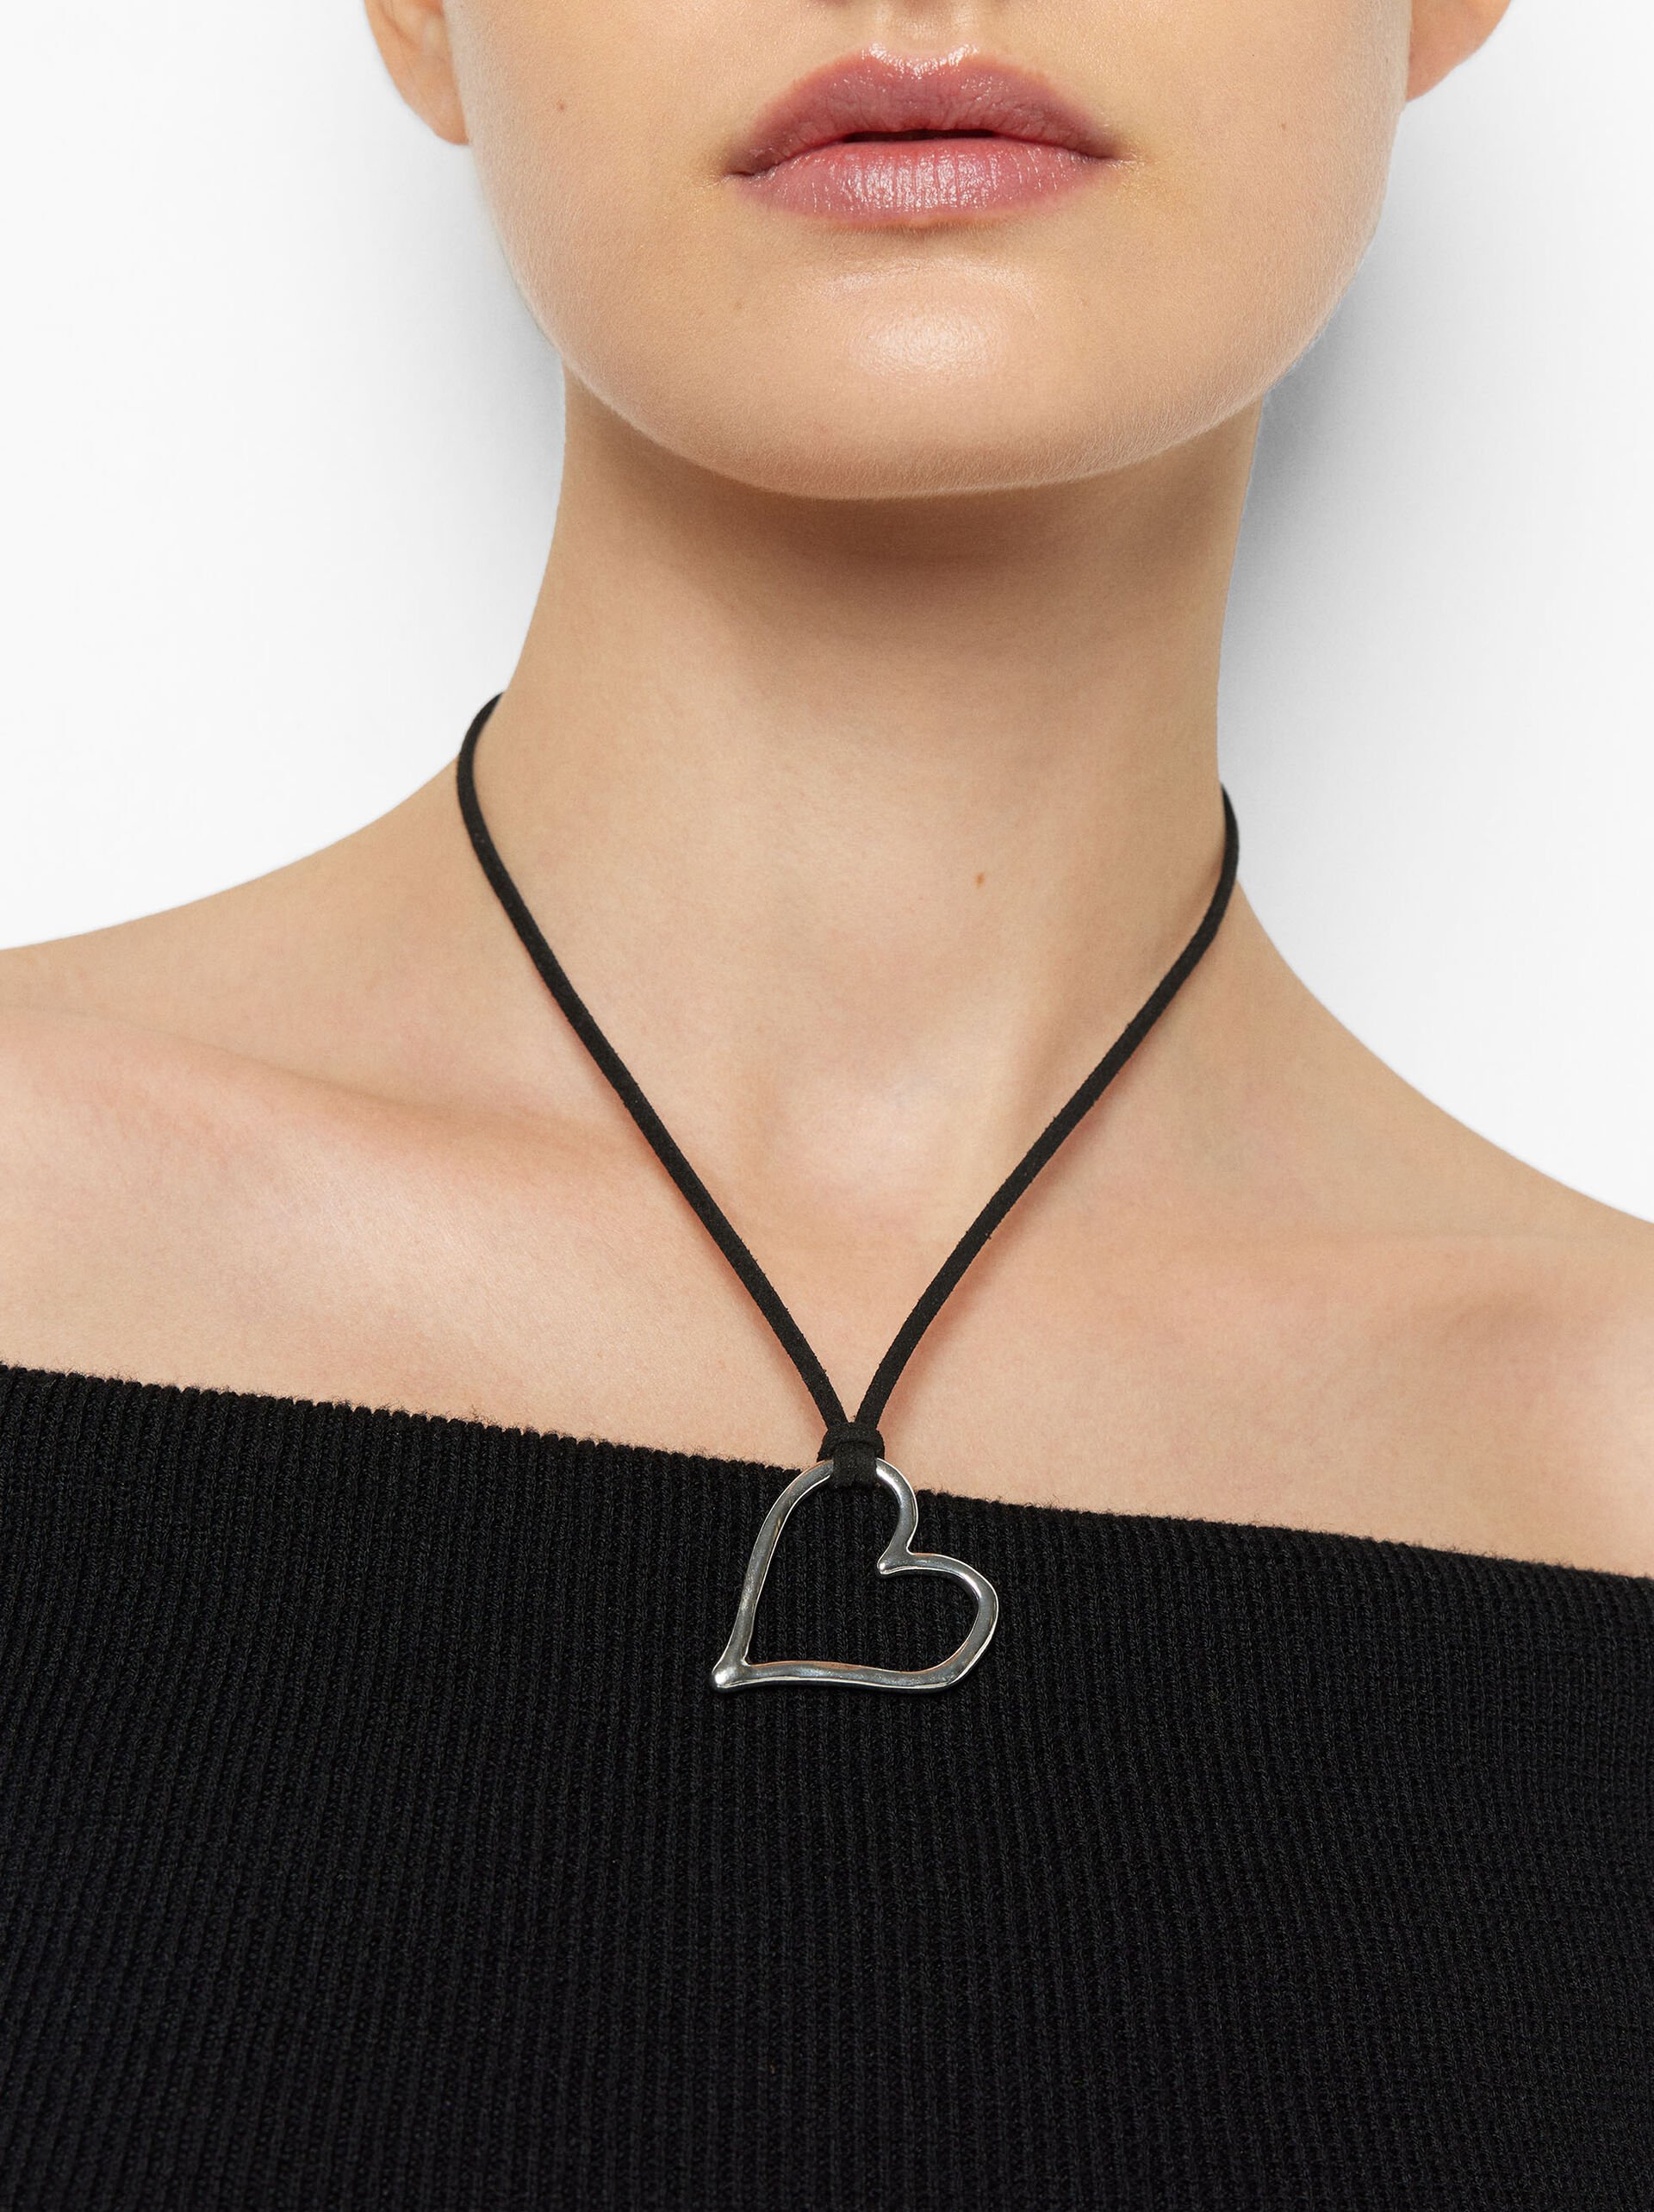 Cord Neckalace With Heart image number 1.0